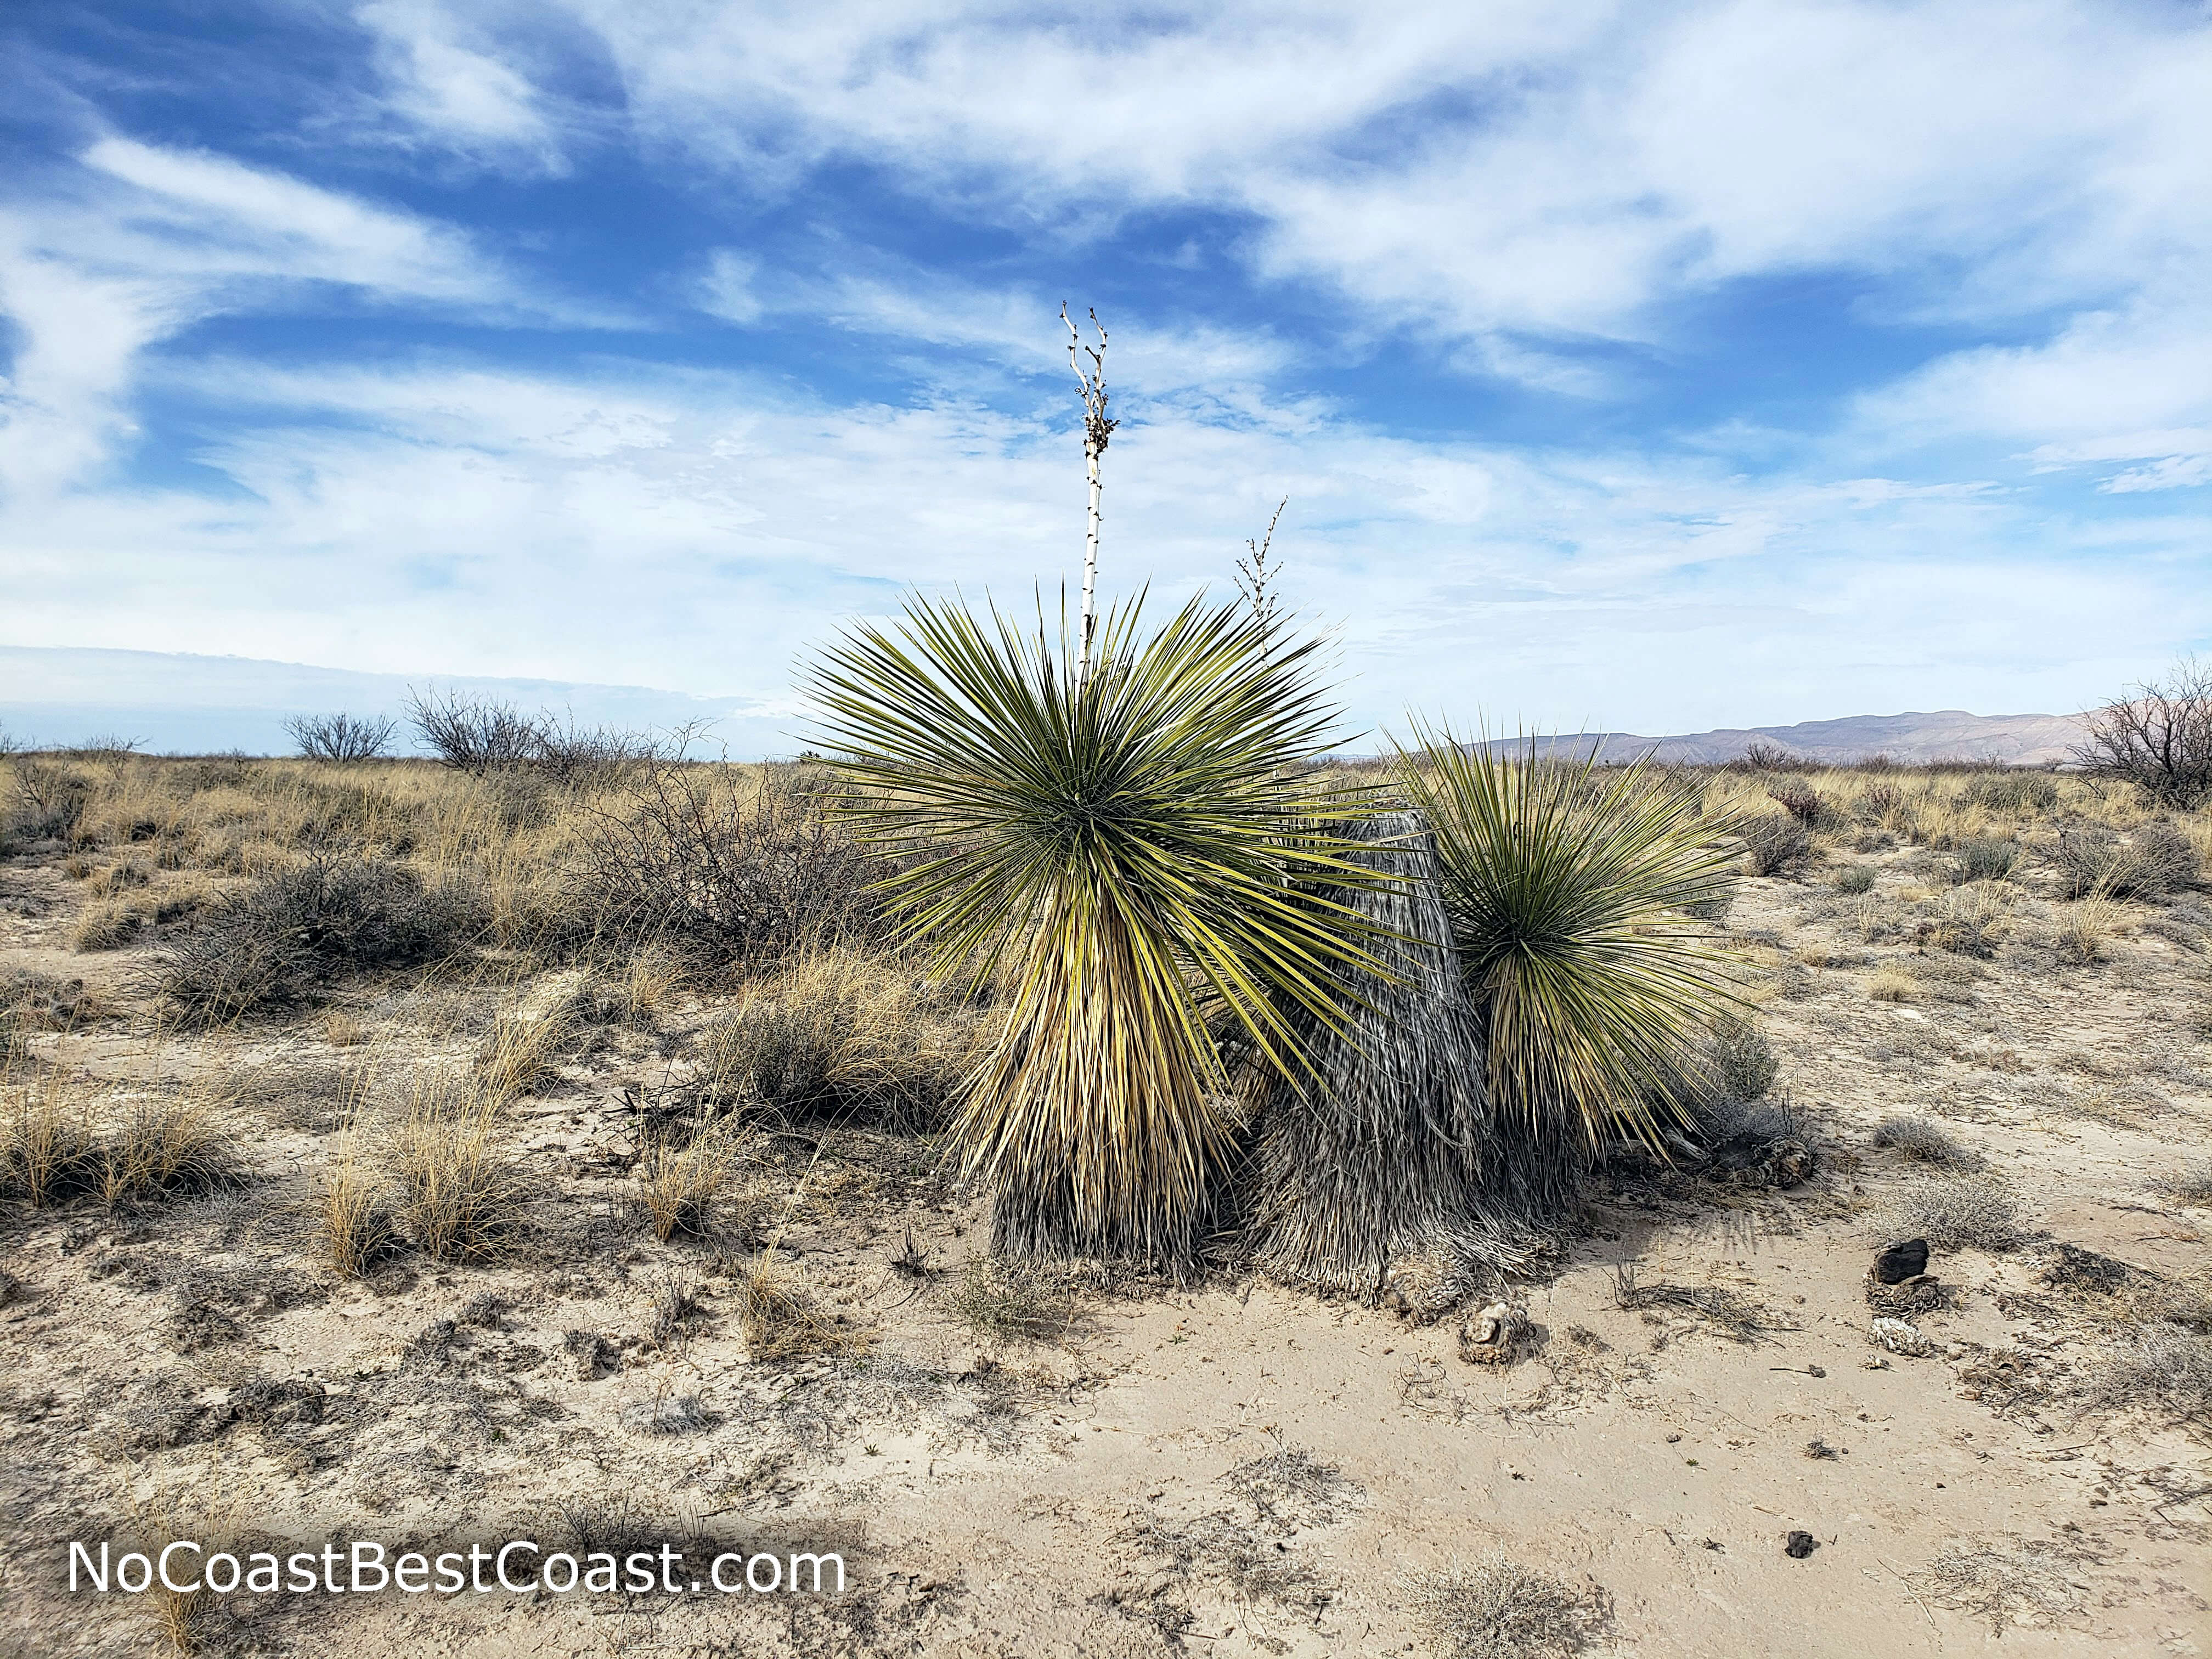 Yucca is the most iconic plant of the Chichuahuan Desert